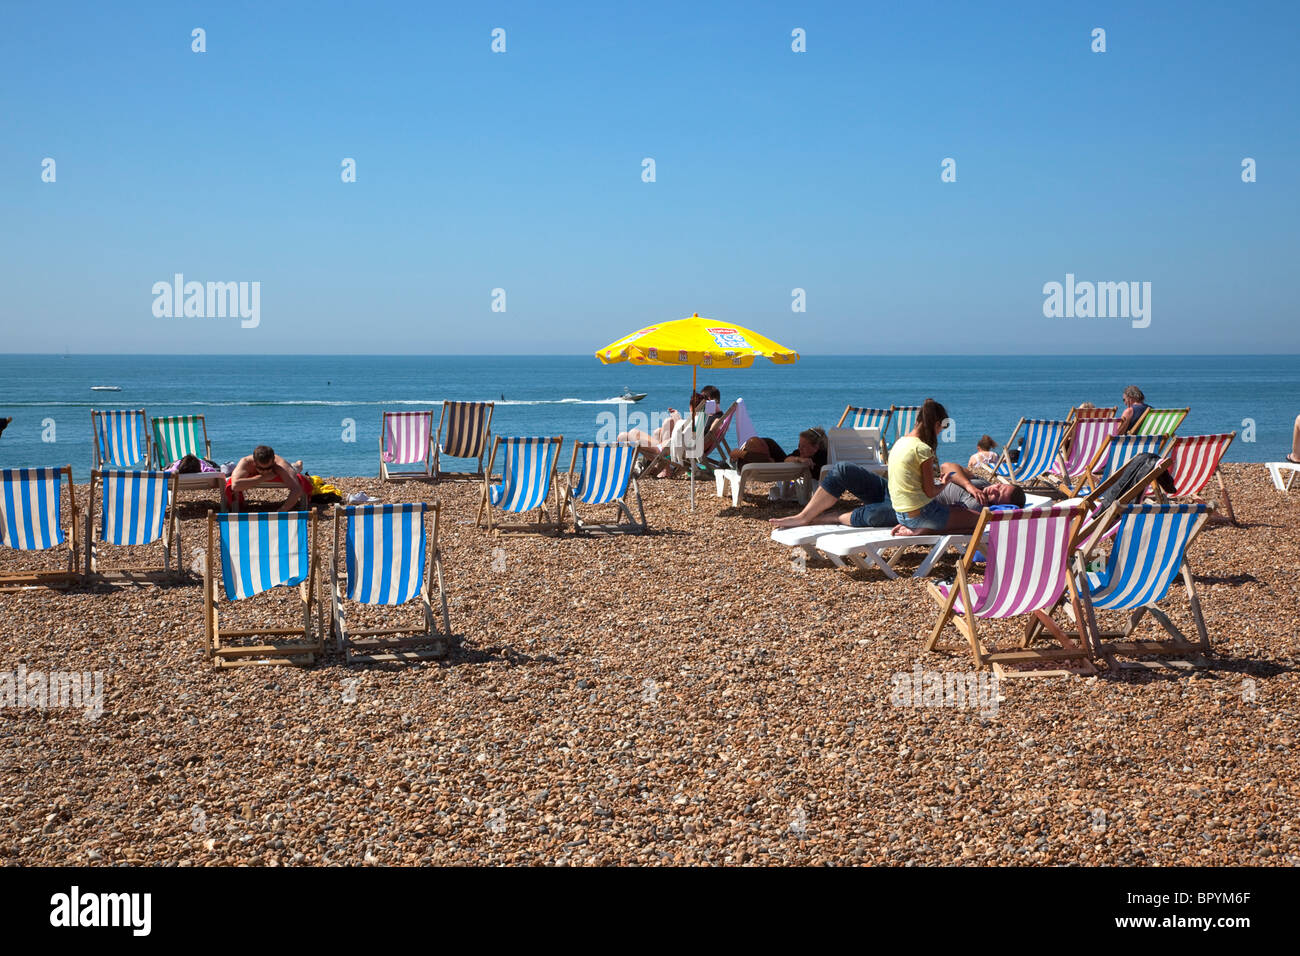 England, East Sussex, Brighton, Deck chairs and sunbathers on the pebble beach. Stock Photo